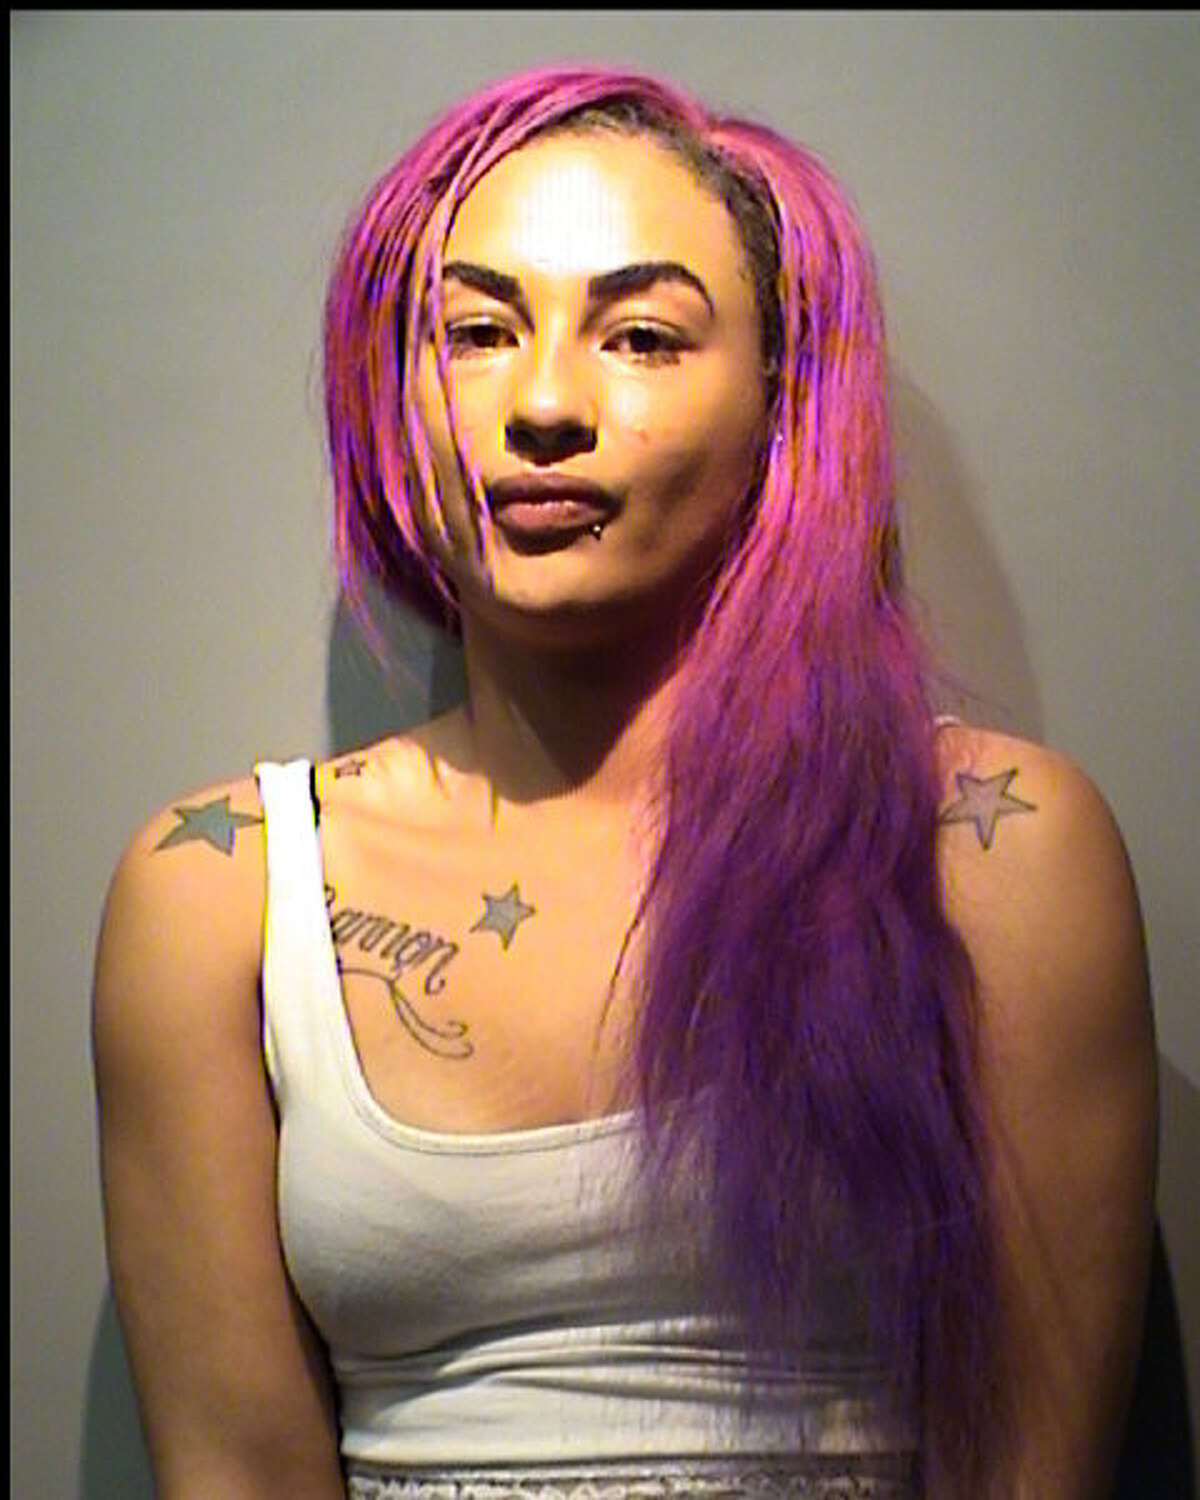 Donna McGee was arrested and charged as part of an October 2015 prostitution sting by Pasadena Police. When the women arrived at the motel and agreed to engage in prostitution they were arrested. All of the women arrived with companions, mostly males. Many of the companions were also arrested for various charges. A total of 12 people were arrested during the sting operation resulting in 4 felony and 8 misdemeanor charges. Various quantities of marijuana and methamphetamine were seized, along with one handgun.